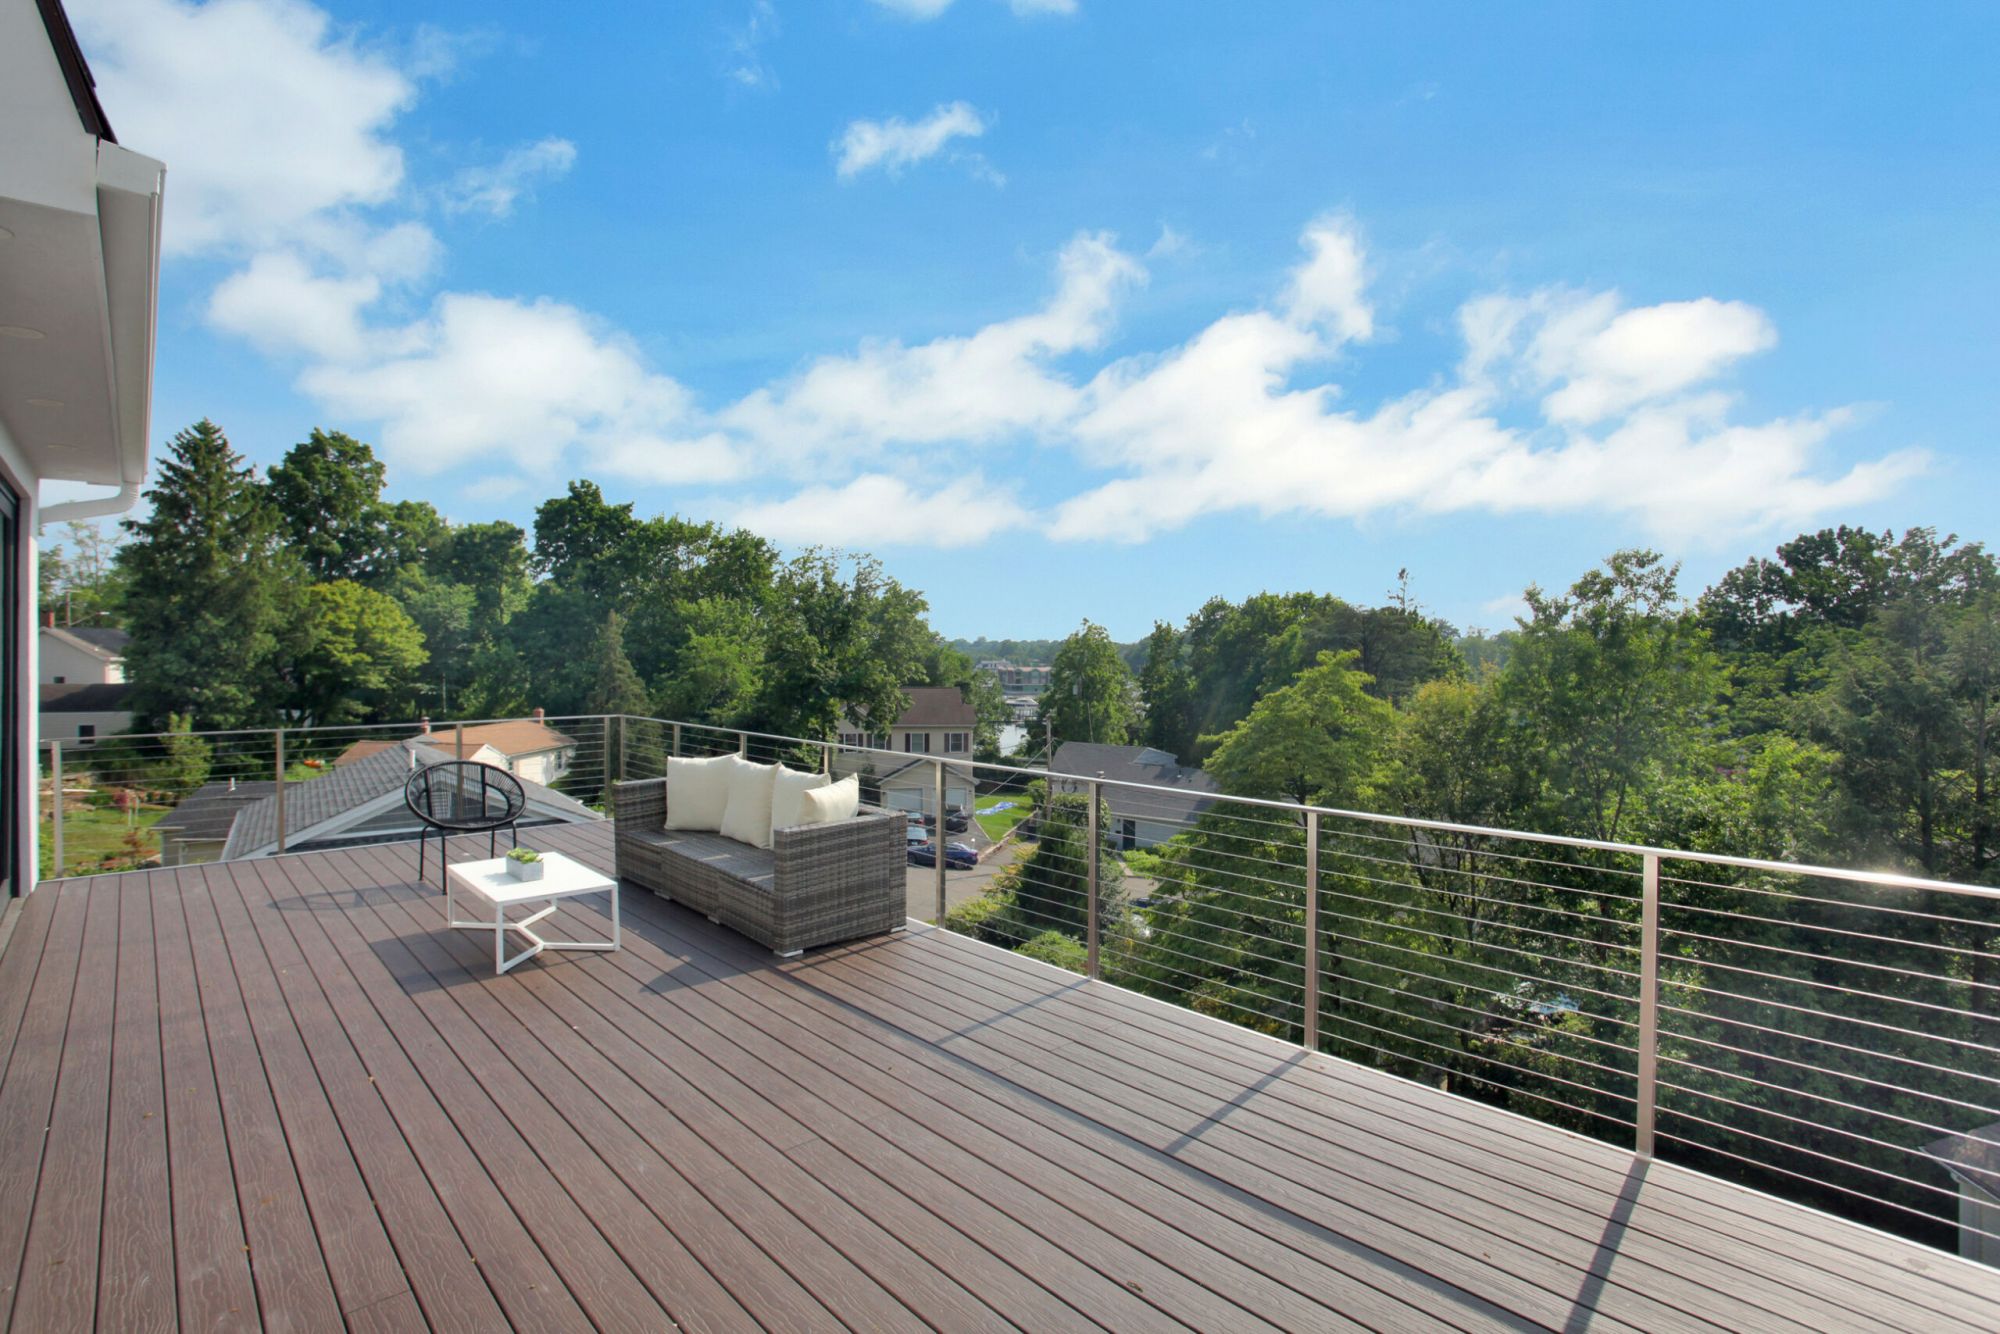 70-new-certified-zero-energy-ready-home-greenwich-ct-